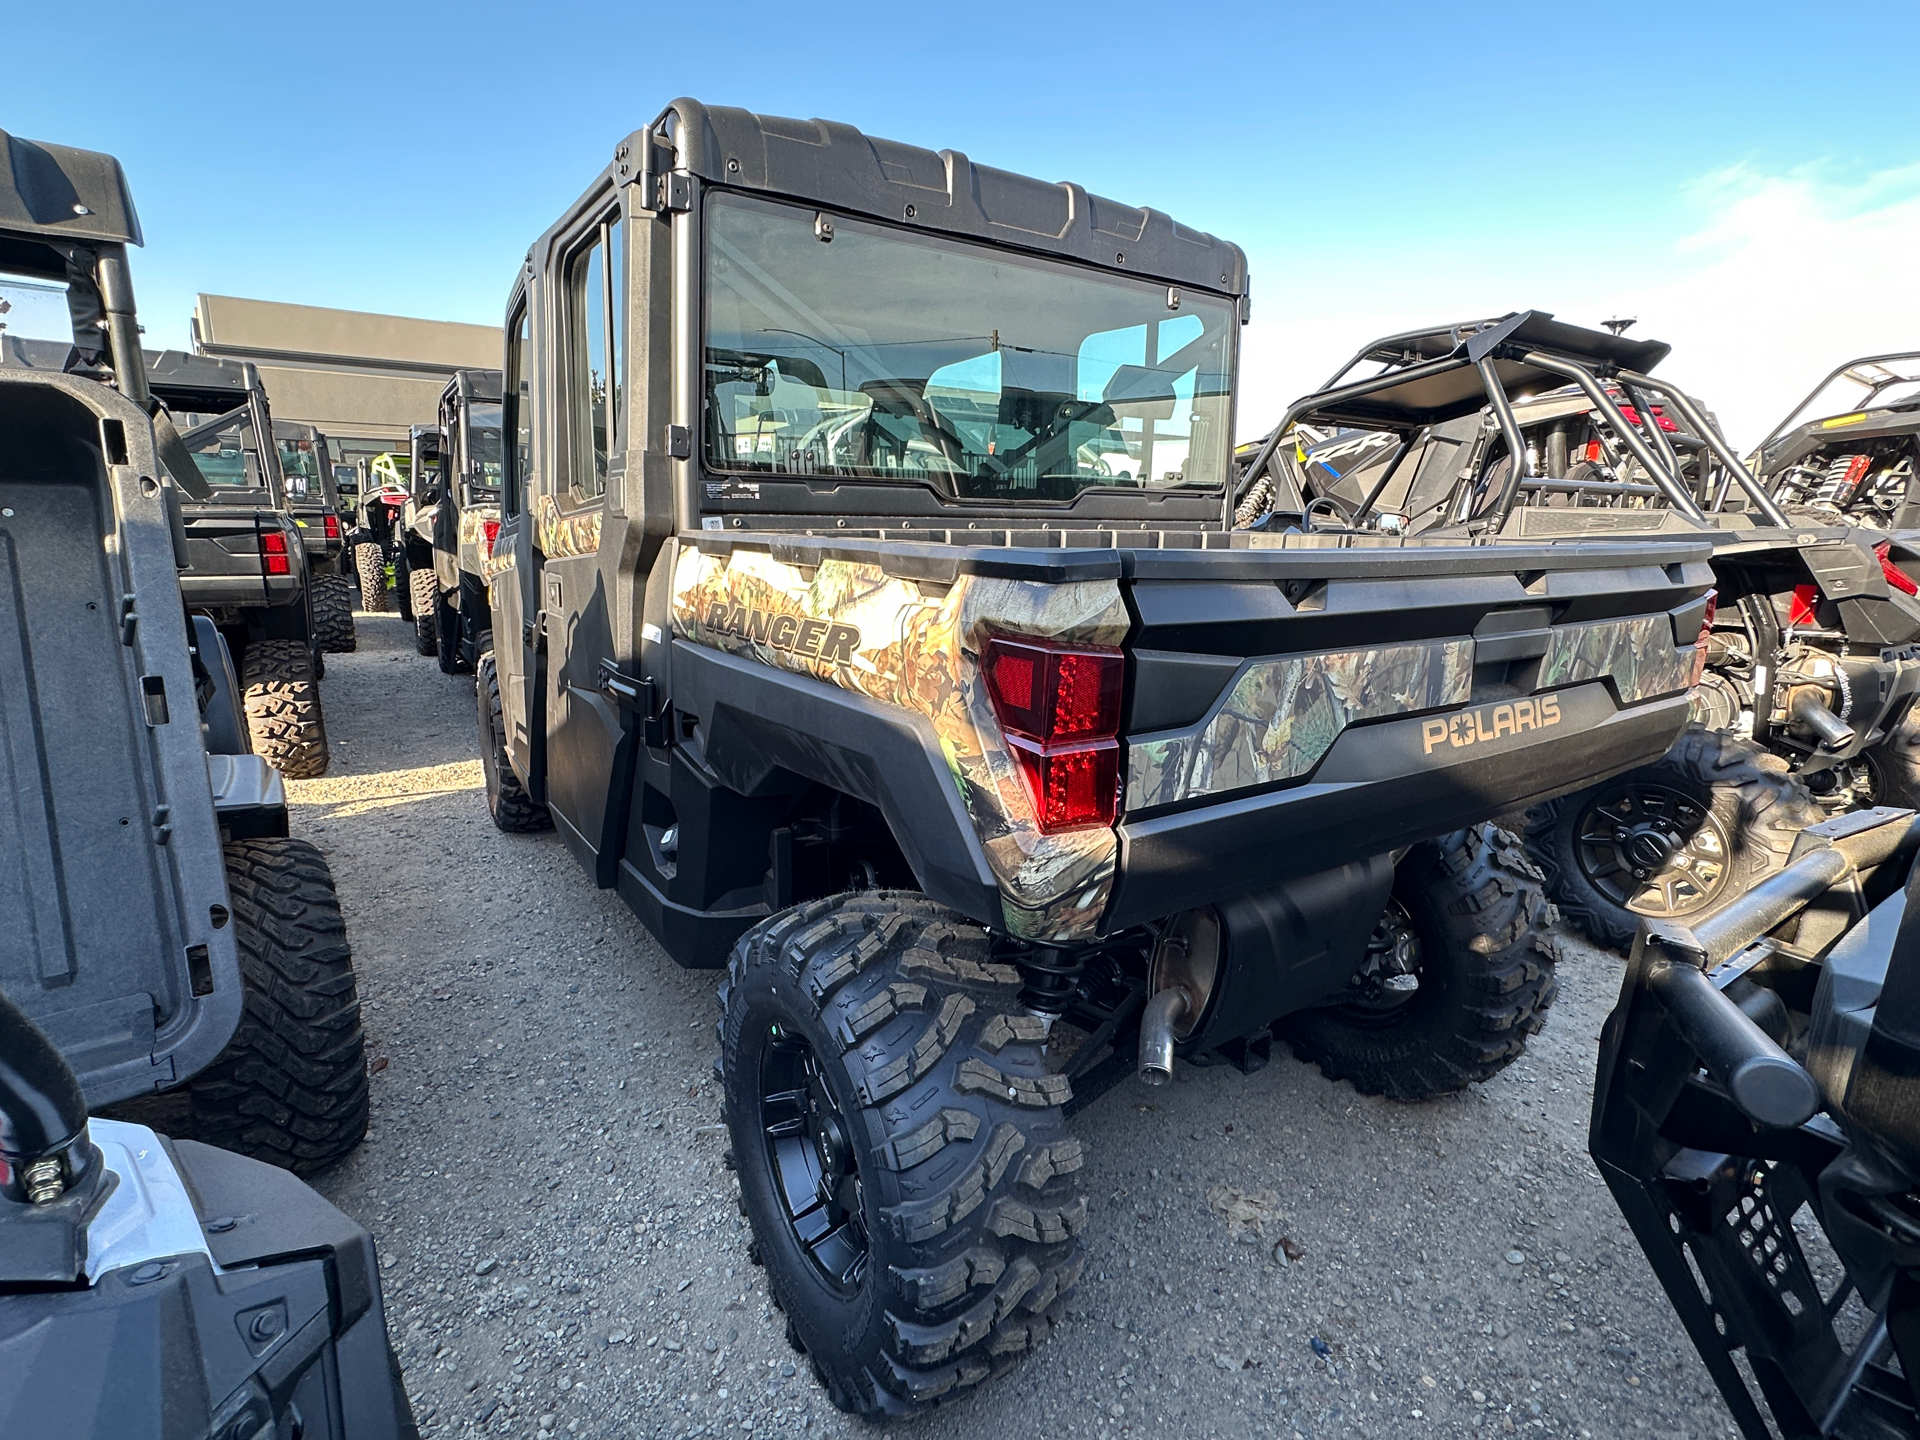 2023 Polaris Ranger Crew XP 1000 NorthStar Edition Ultimate - Ride Command Package in Elk Grove, California - Photo 2